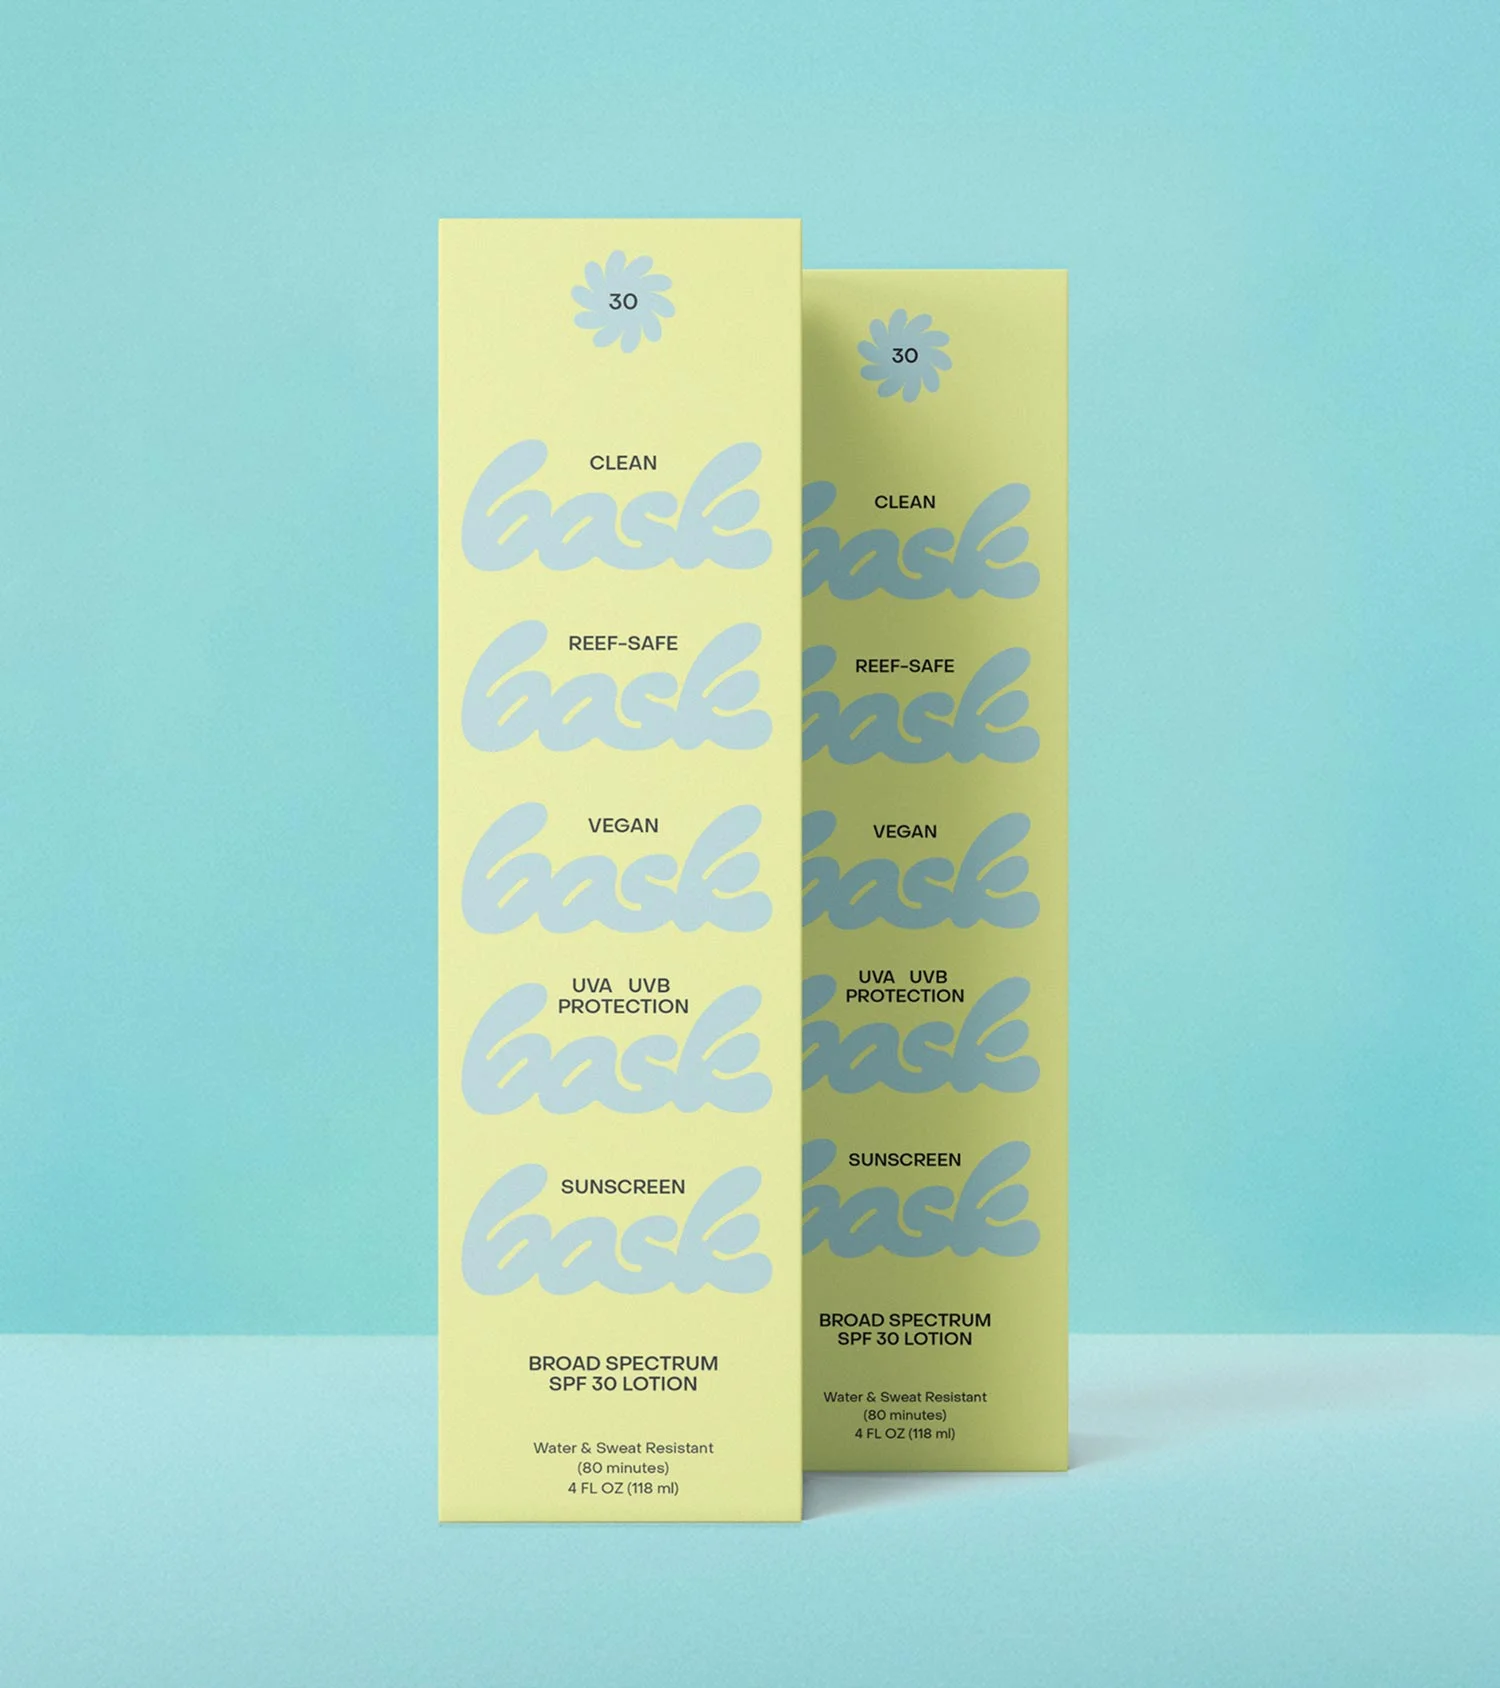 Bask Suncare SPF 30 Lotion Packaging, designed by RoAndCo